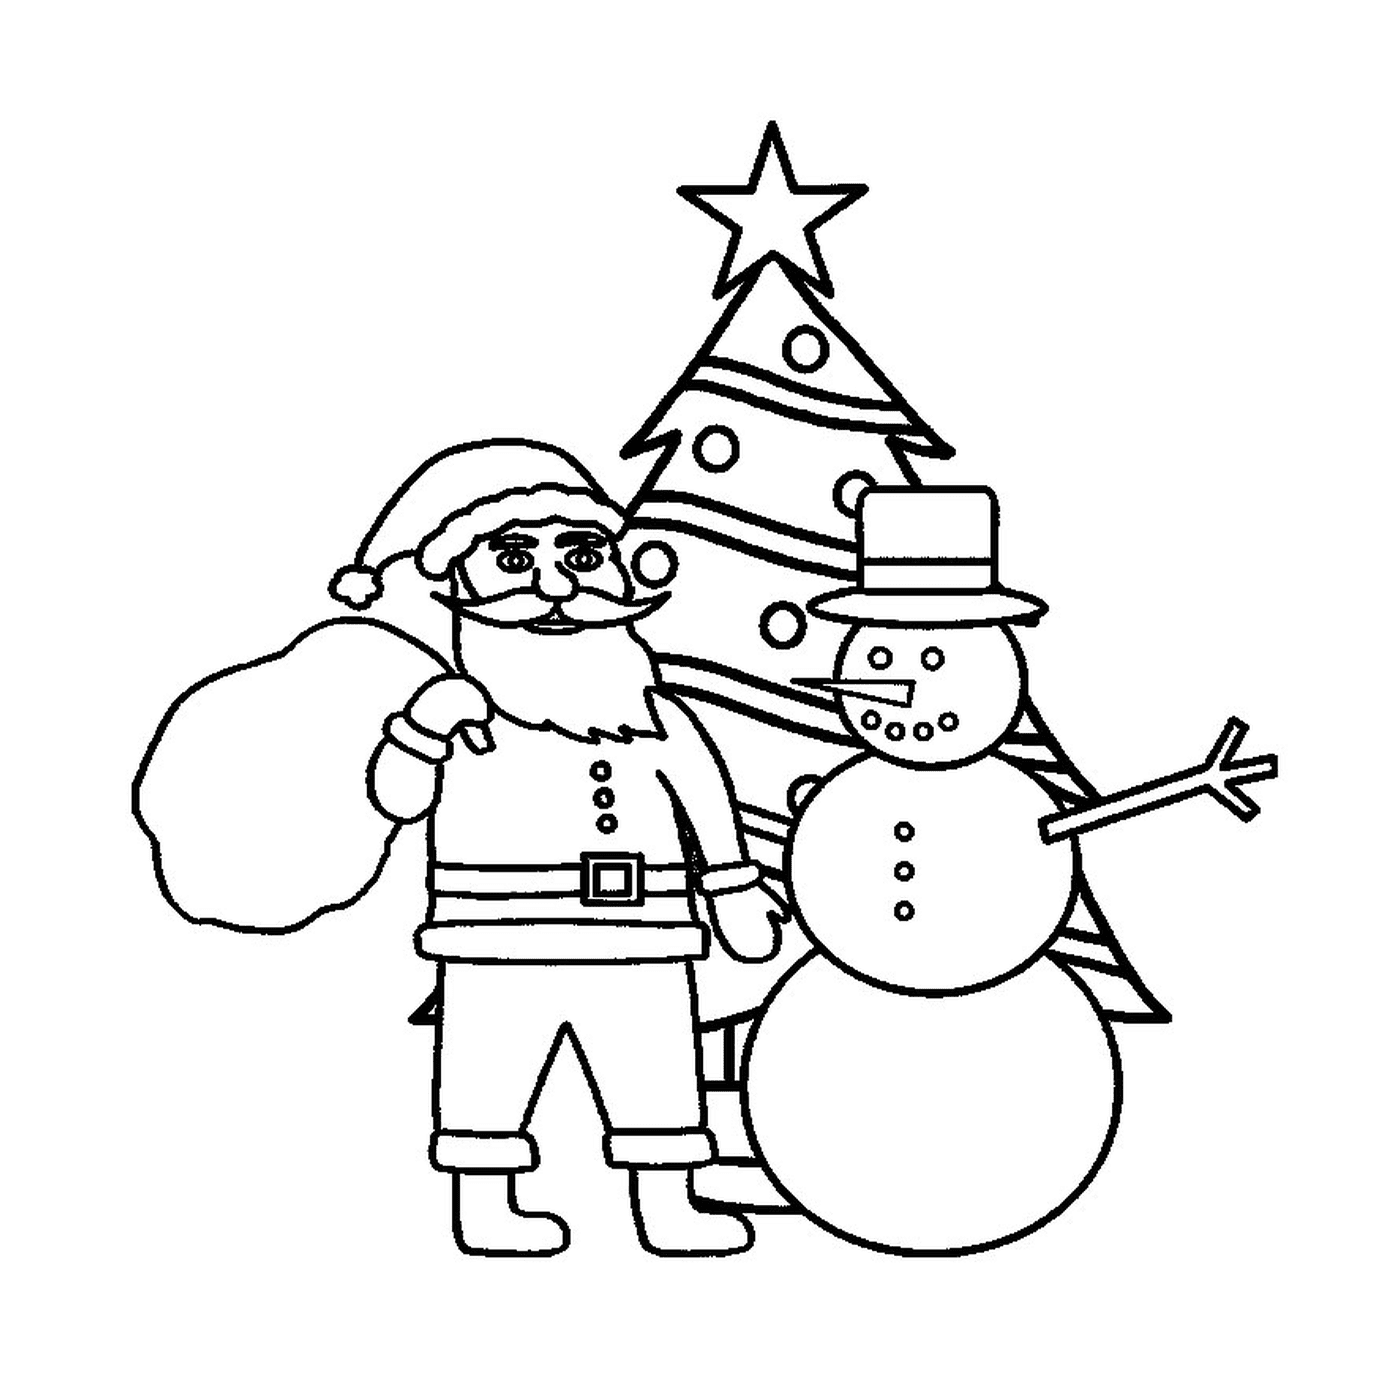  A Christmas tree with Santa Claus and a snowman 